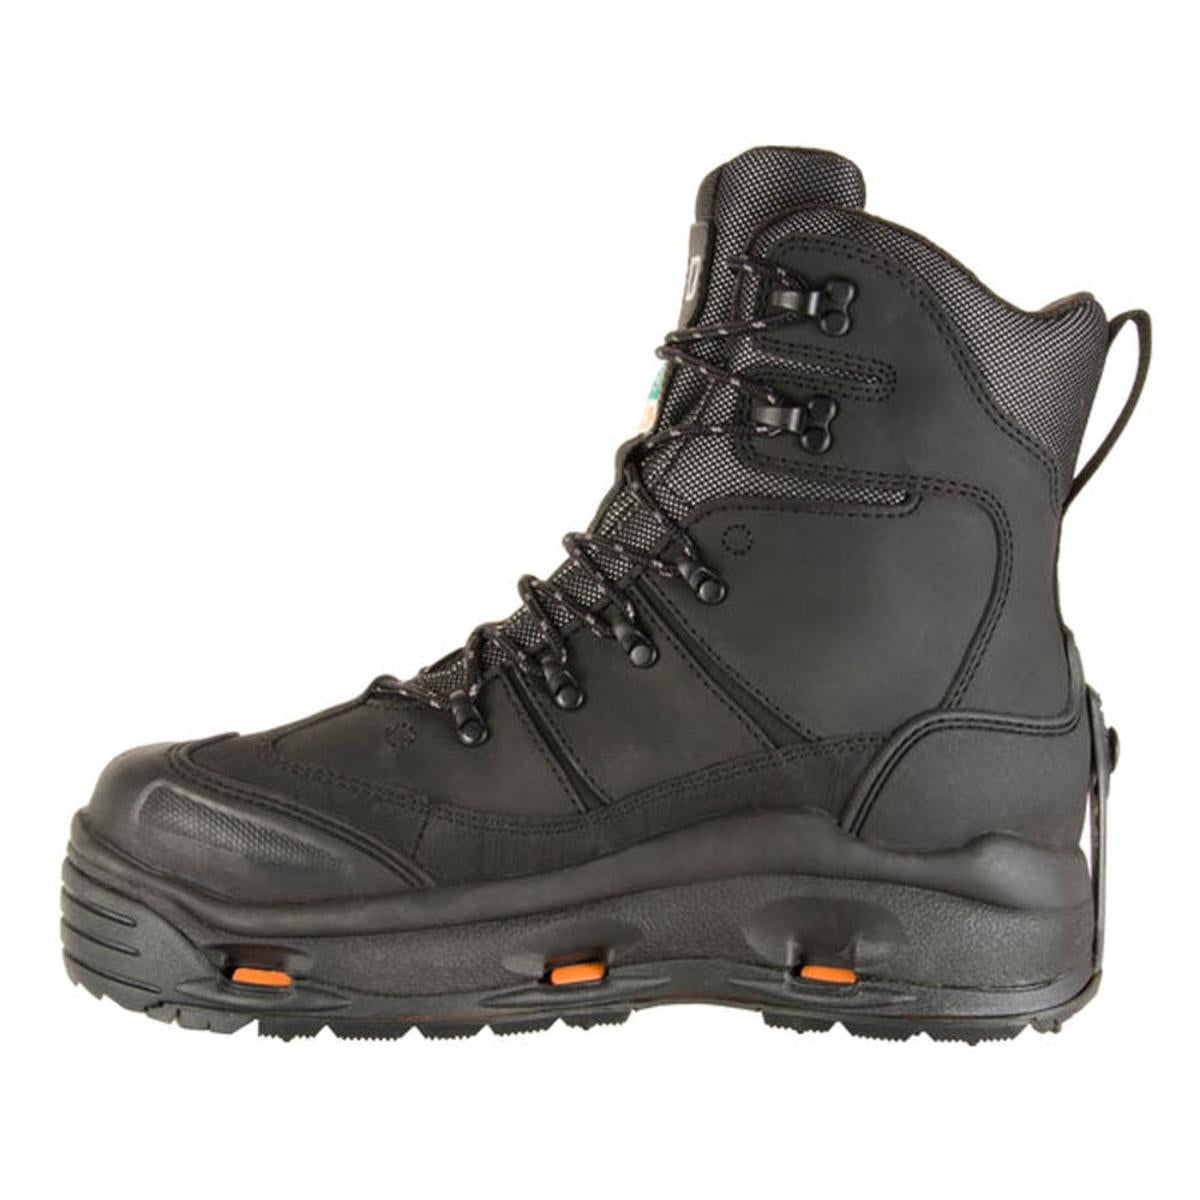 Korkers Men's Snowjack Pro Safety Winter Work Boots with Ninety Degree Sole